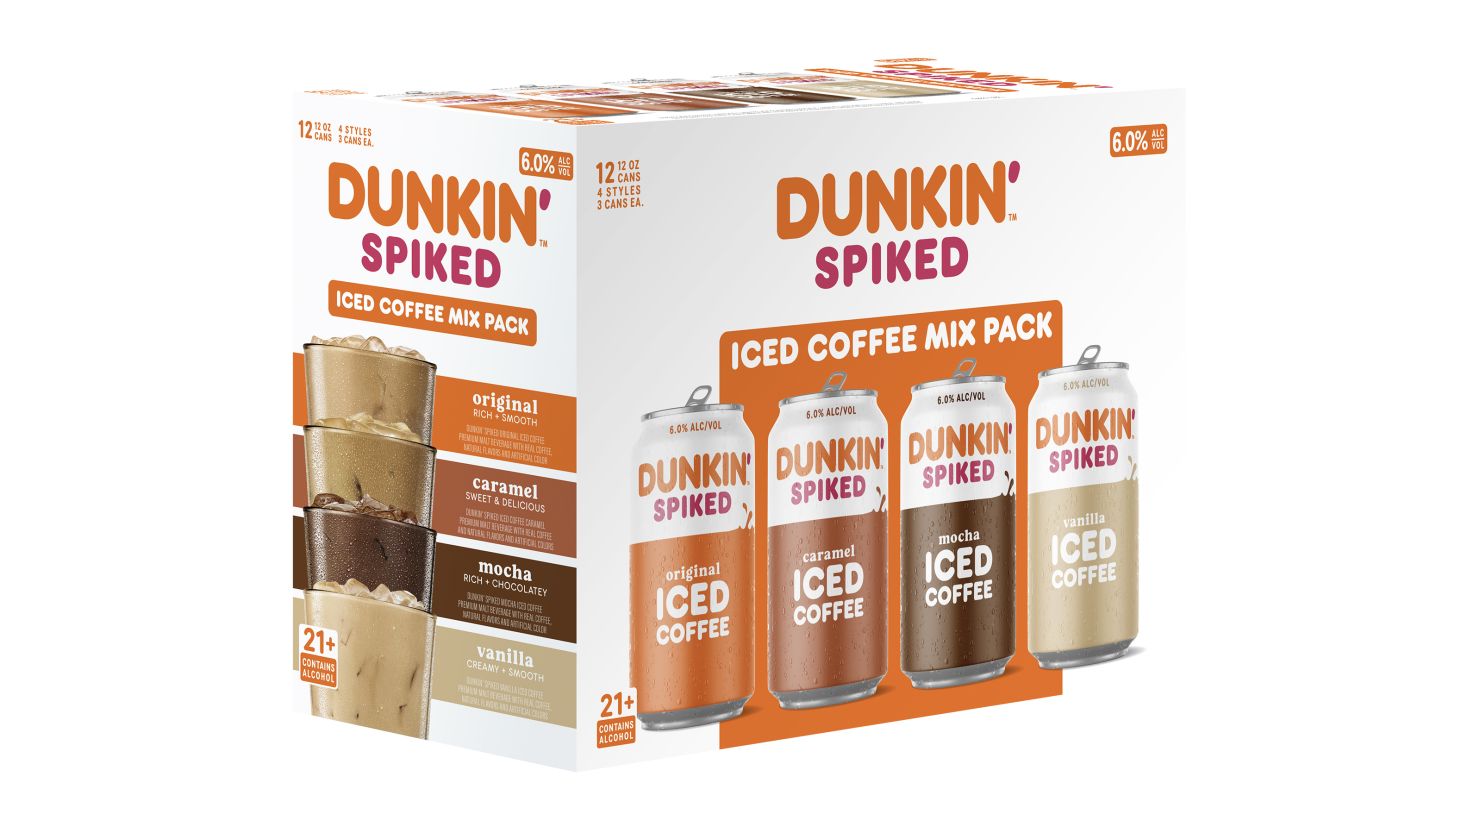 Dunkin' Spiked iced coffee is hitting shelves in September.